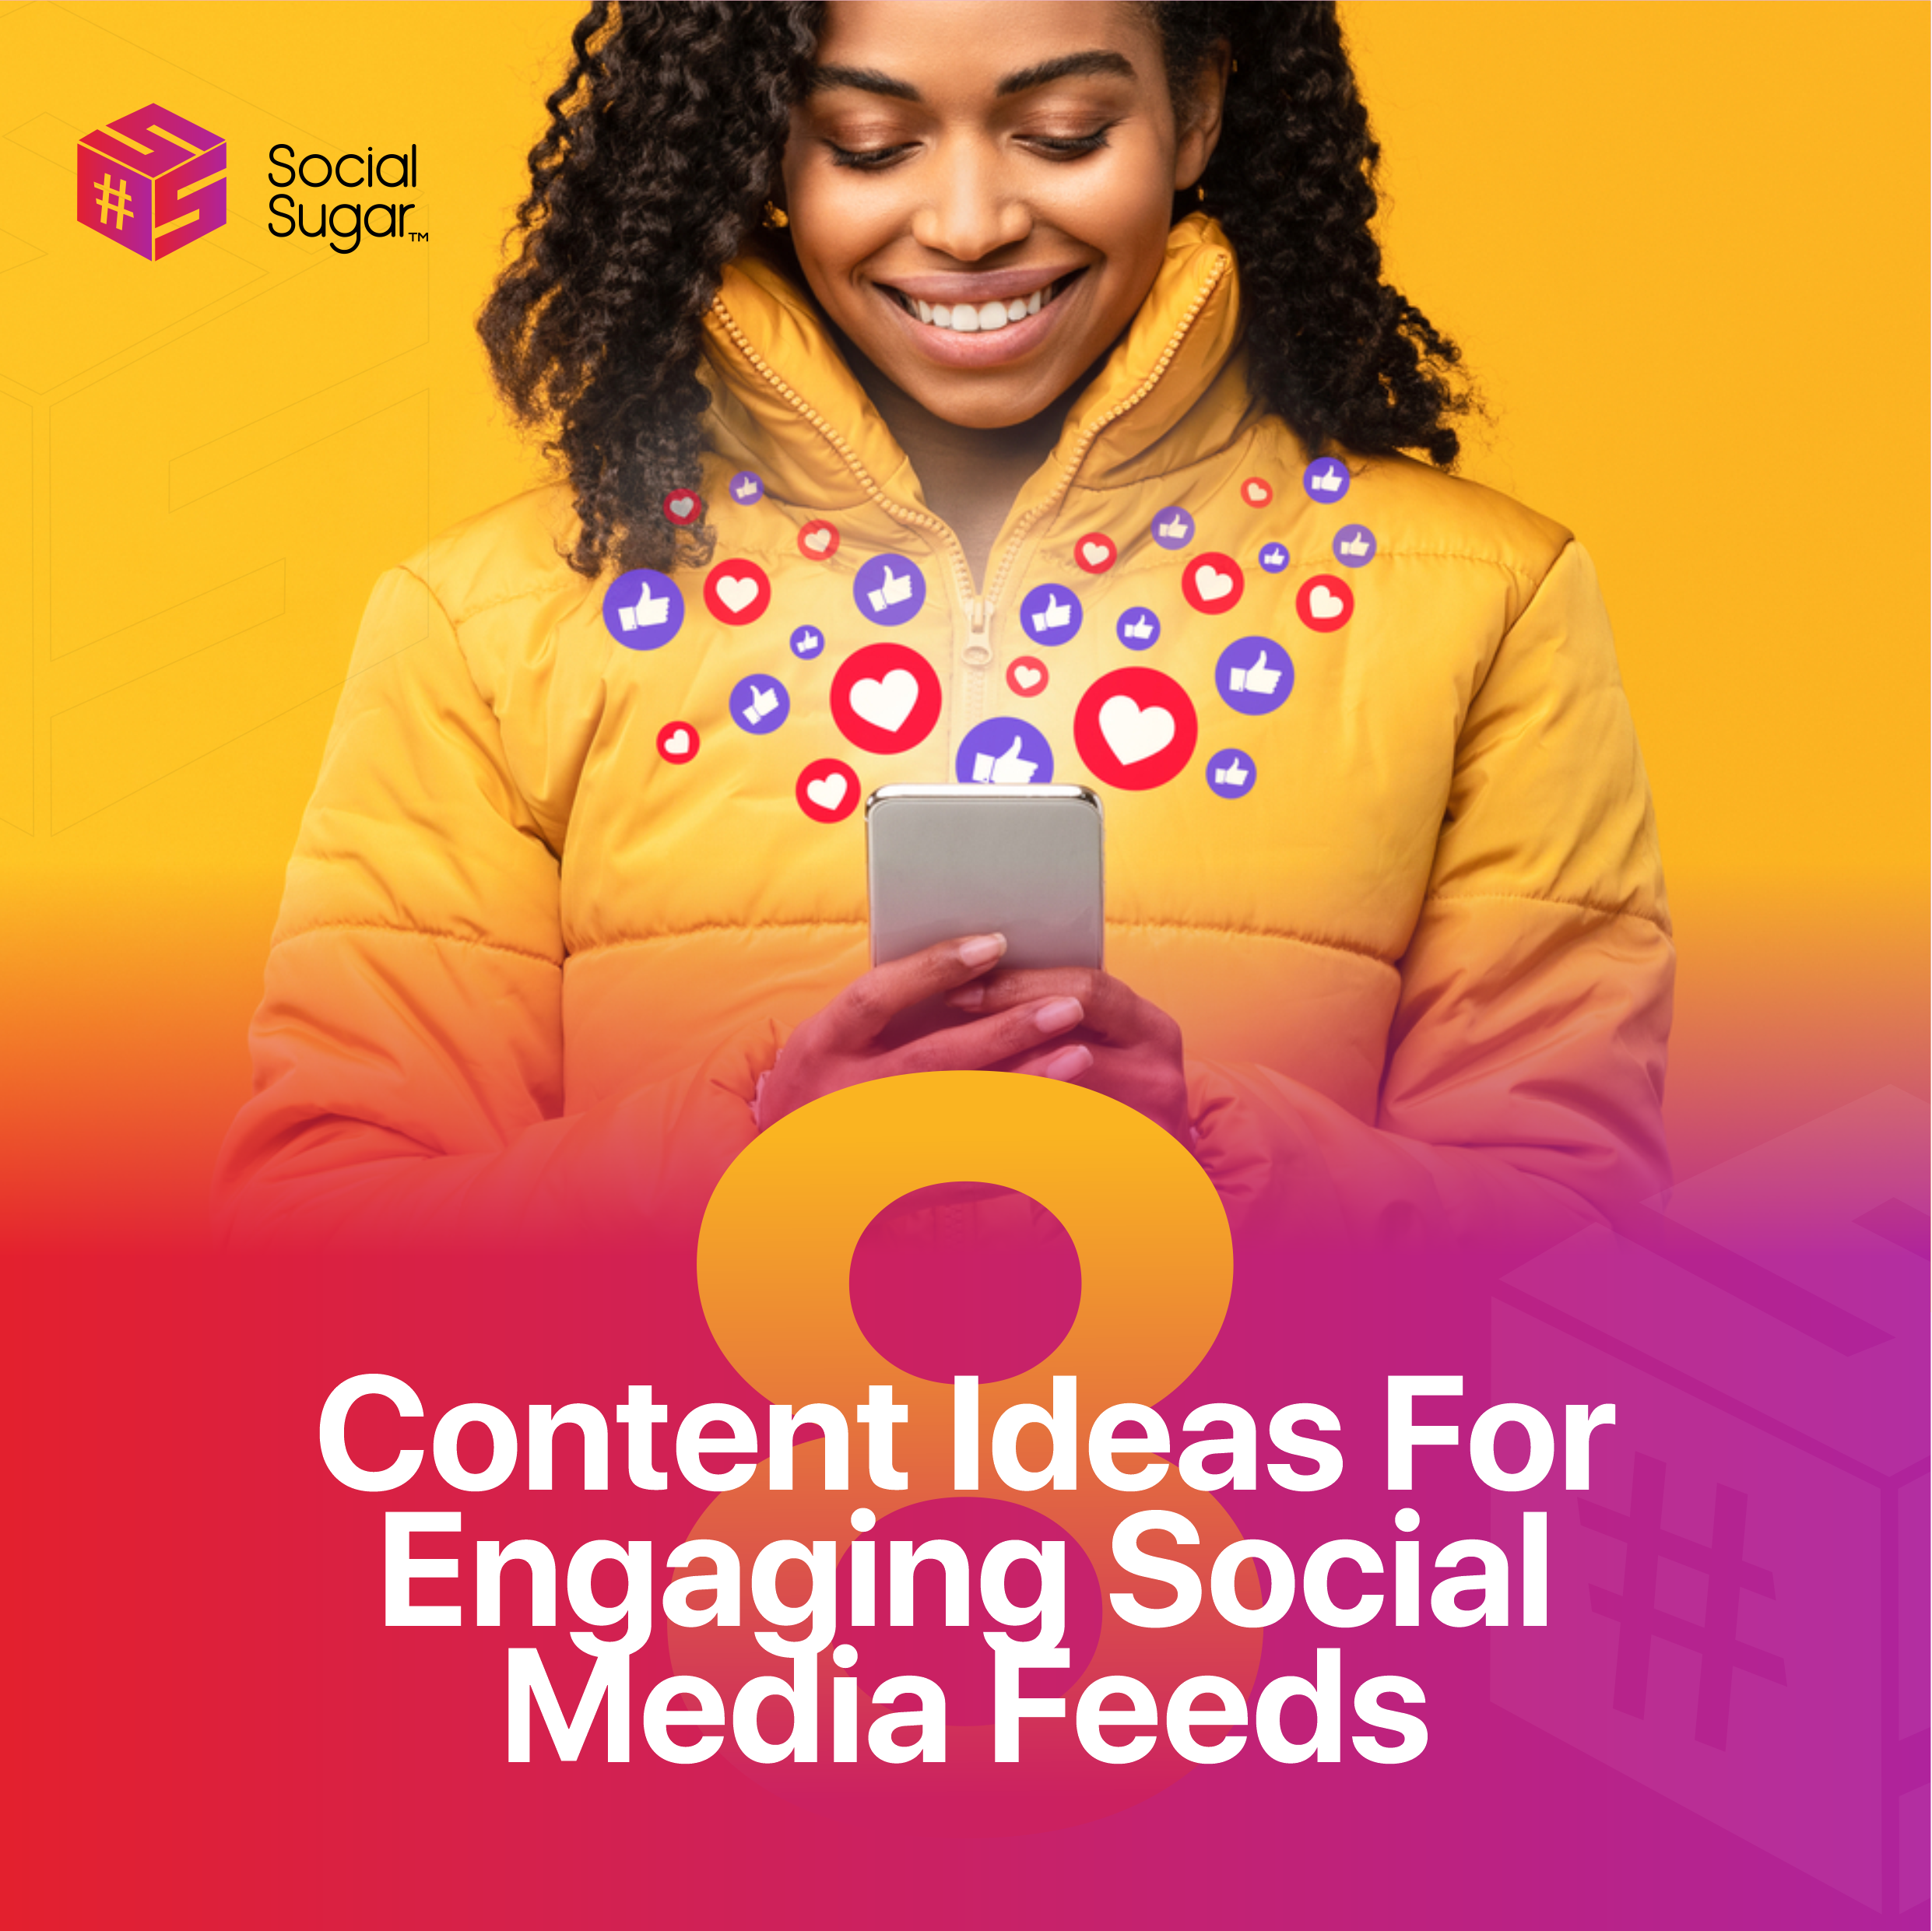 8 Content Ideas For Engaging Social Media Feeds